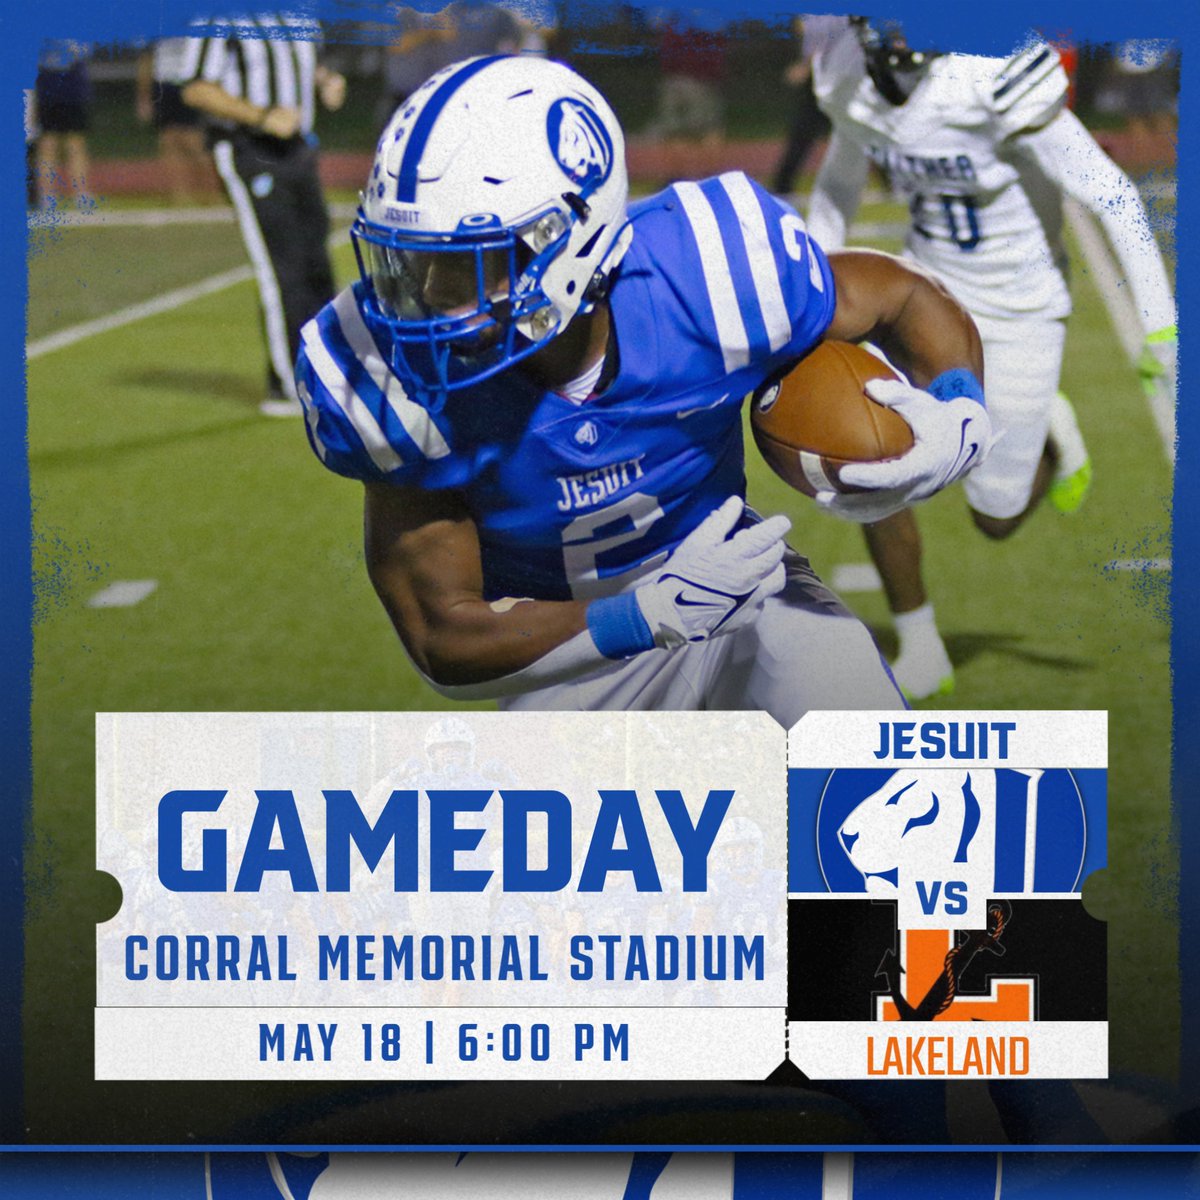 Our Spring Game is Saturday, May 18 vs. Lakeland, right here at Corral Memorial Stadium.

Come out and support the Tigers!

#AMDG #GoTigers #JesuitFootball